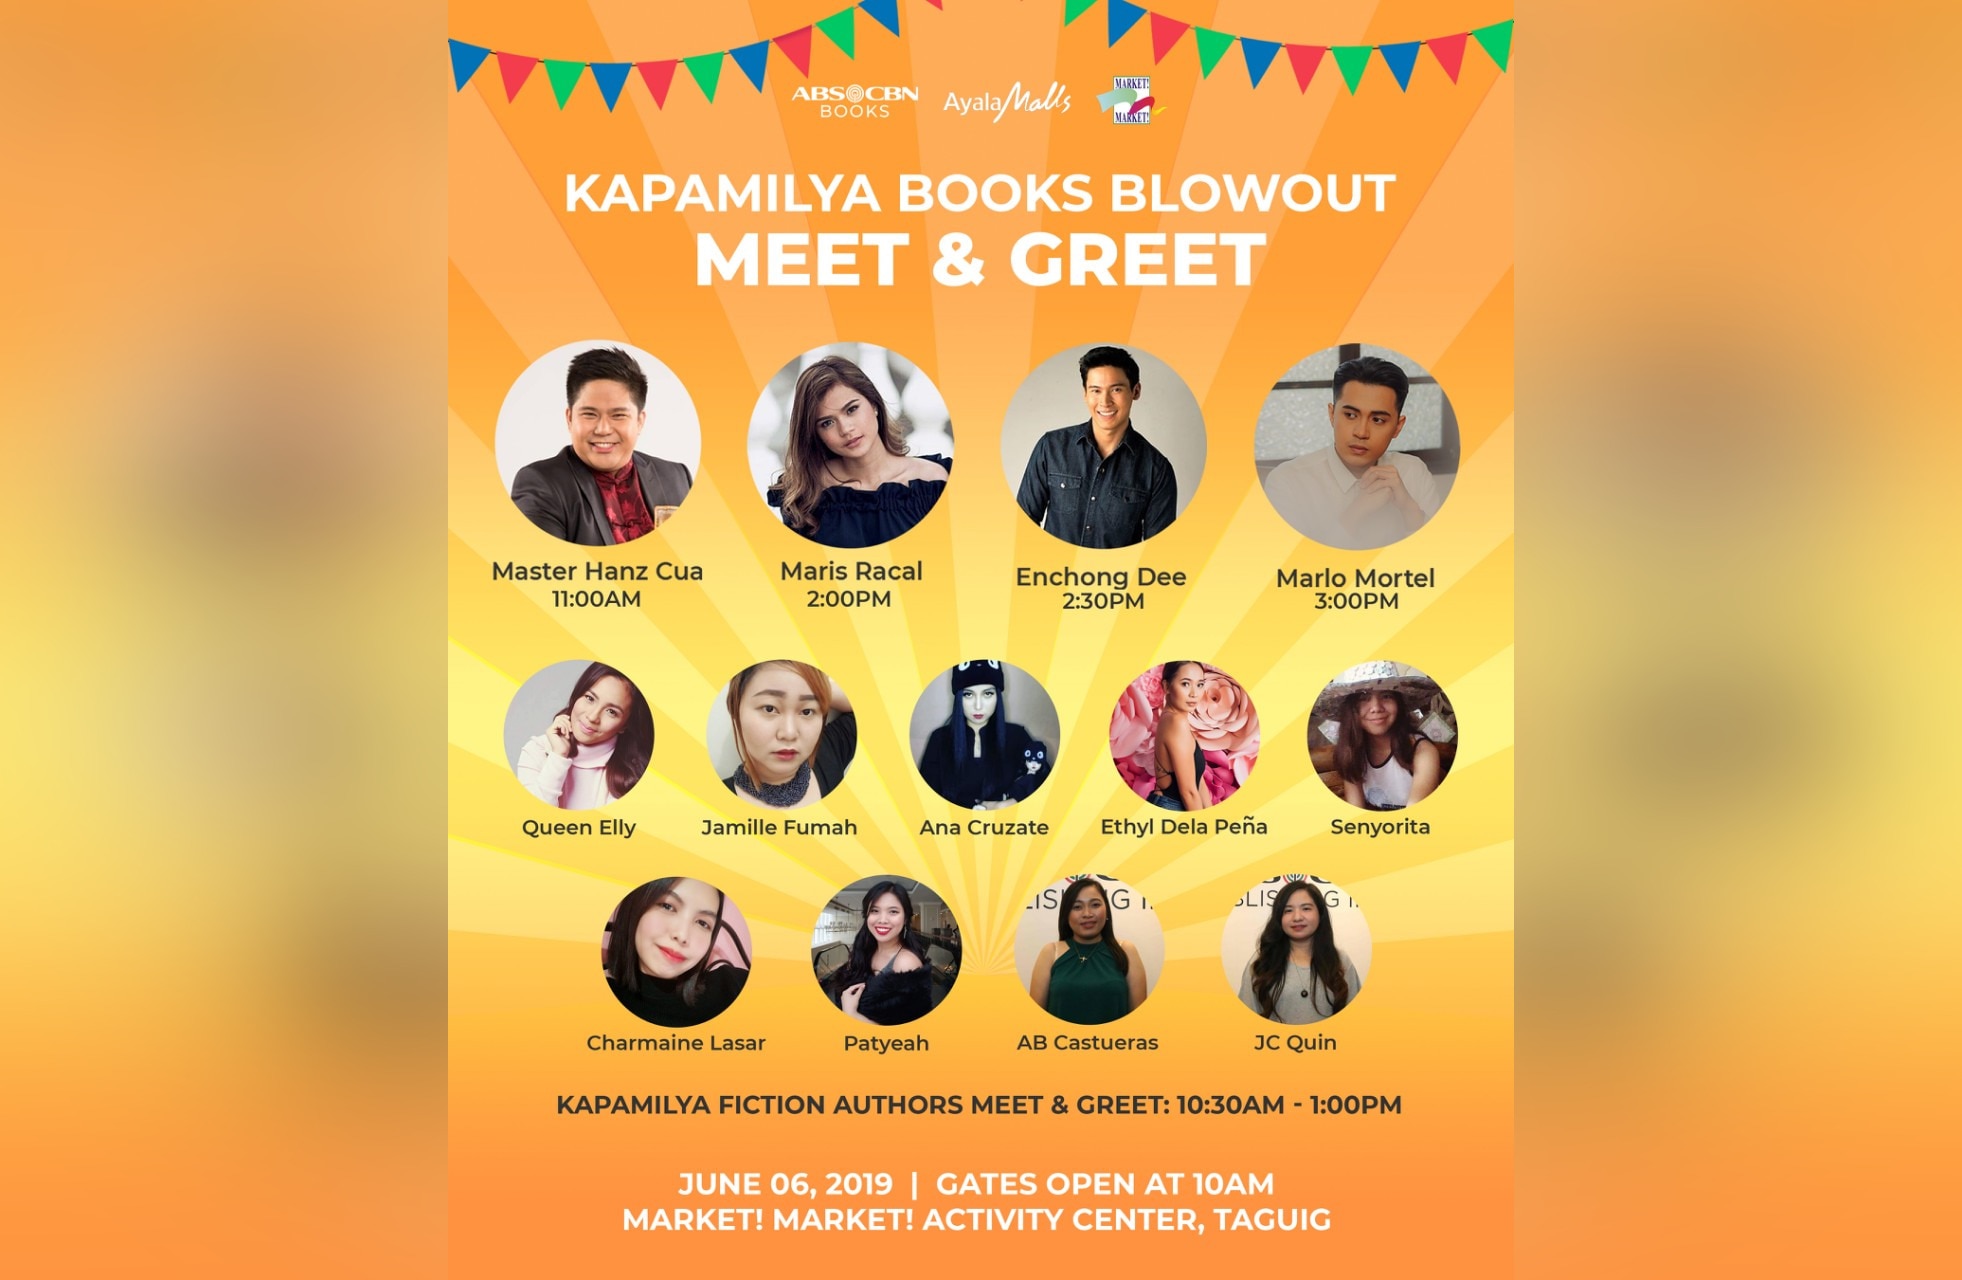 Meet your favorite authors at the Kapamilya Books Blowout